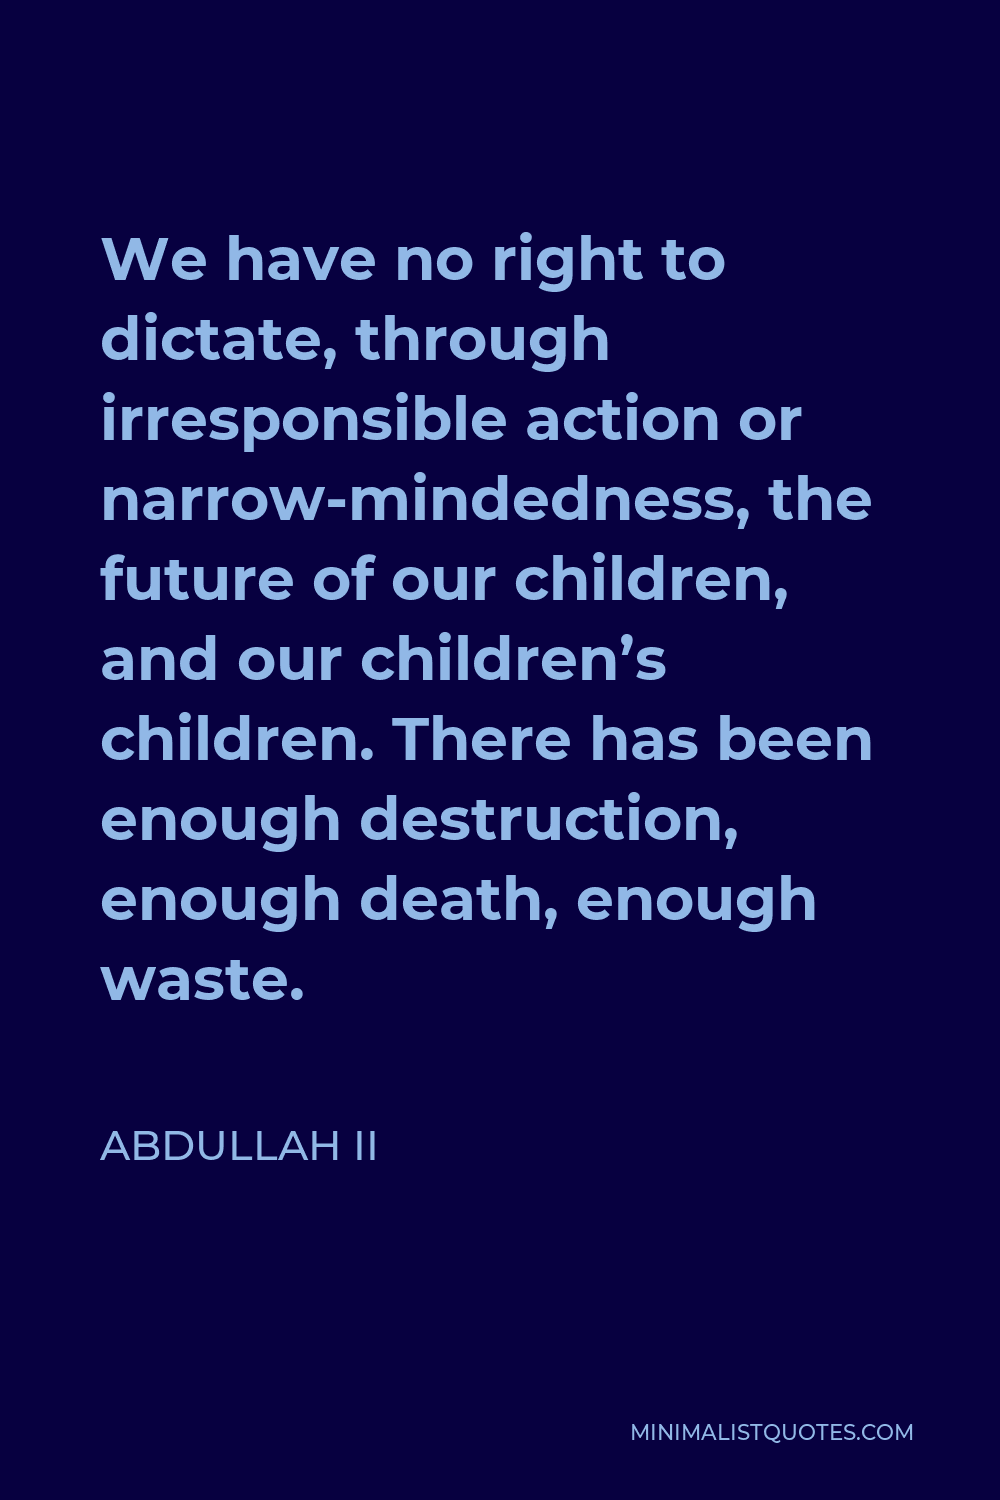 Abdullah II Quote - We have no right to dictate, through irresponsible action or narrow-mindedness, the future of our children, and our children’s children. There has been enough destruction, enough death, enough waste.